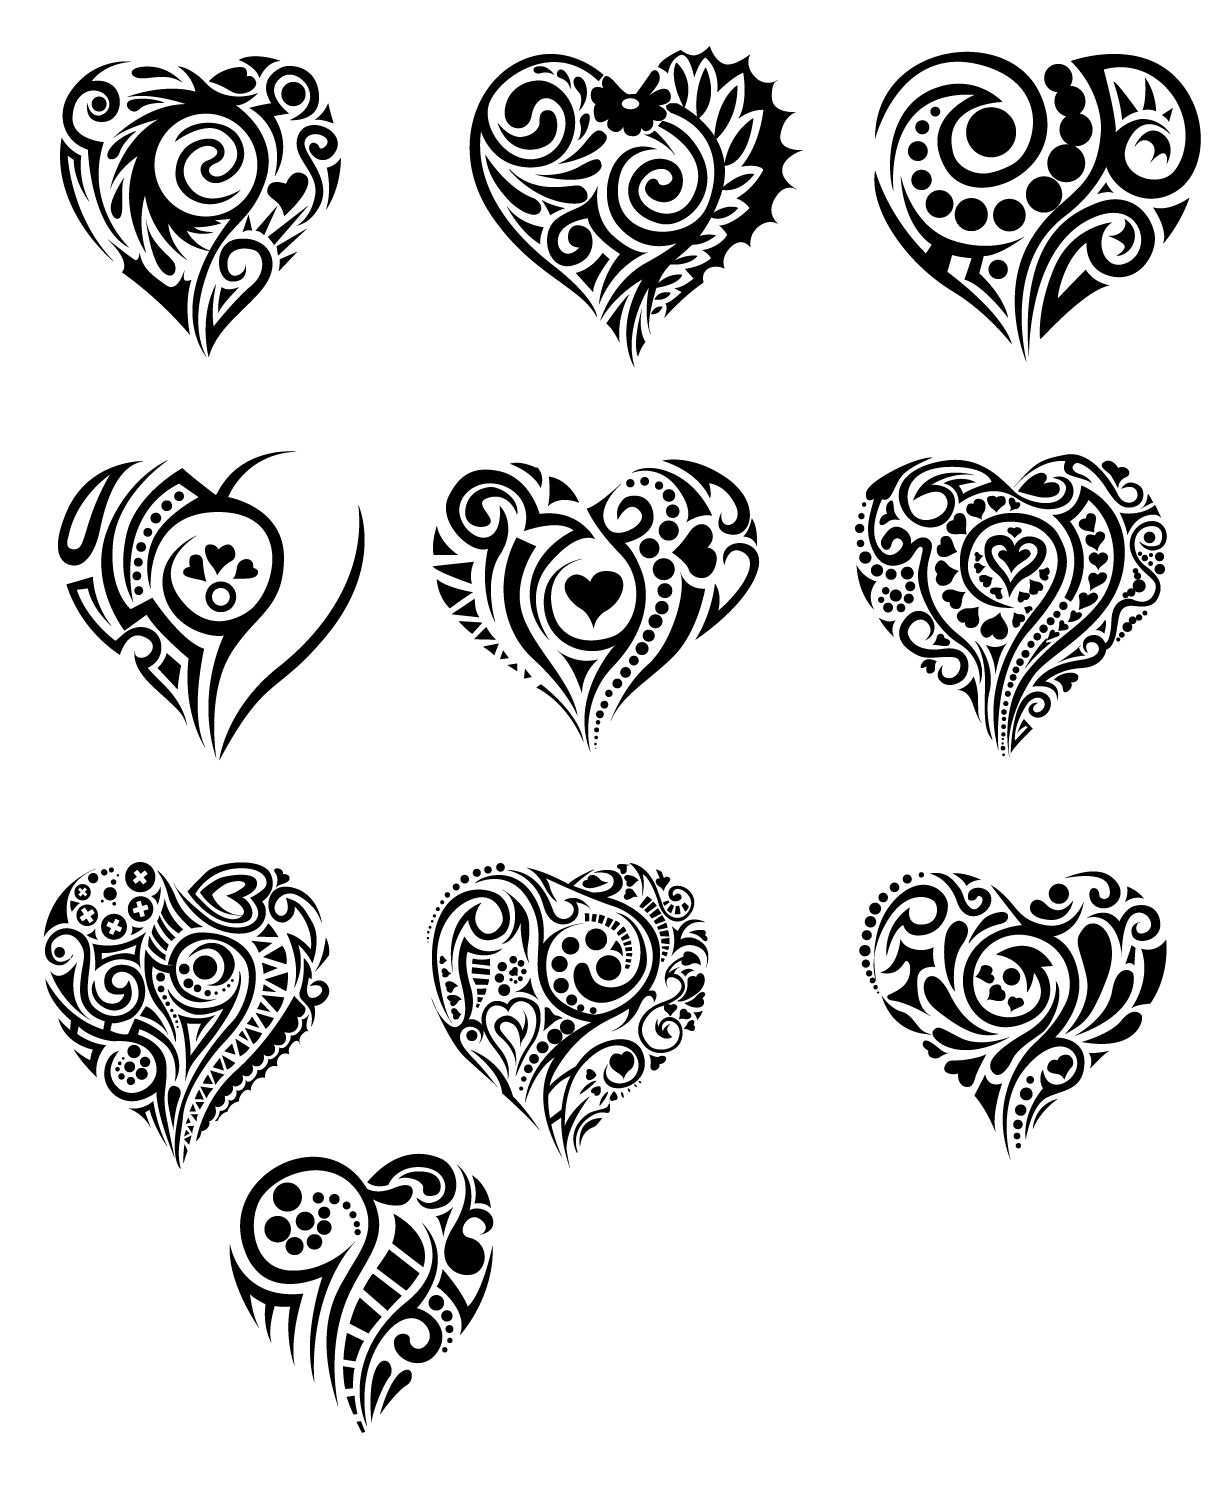 Hearts In Tribal By T3hspoon On Deviantart Tribal Heart Tattoos Tribal Tattoos Tattoos